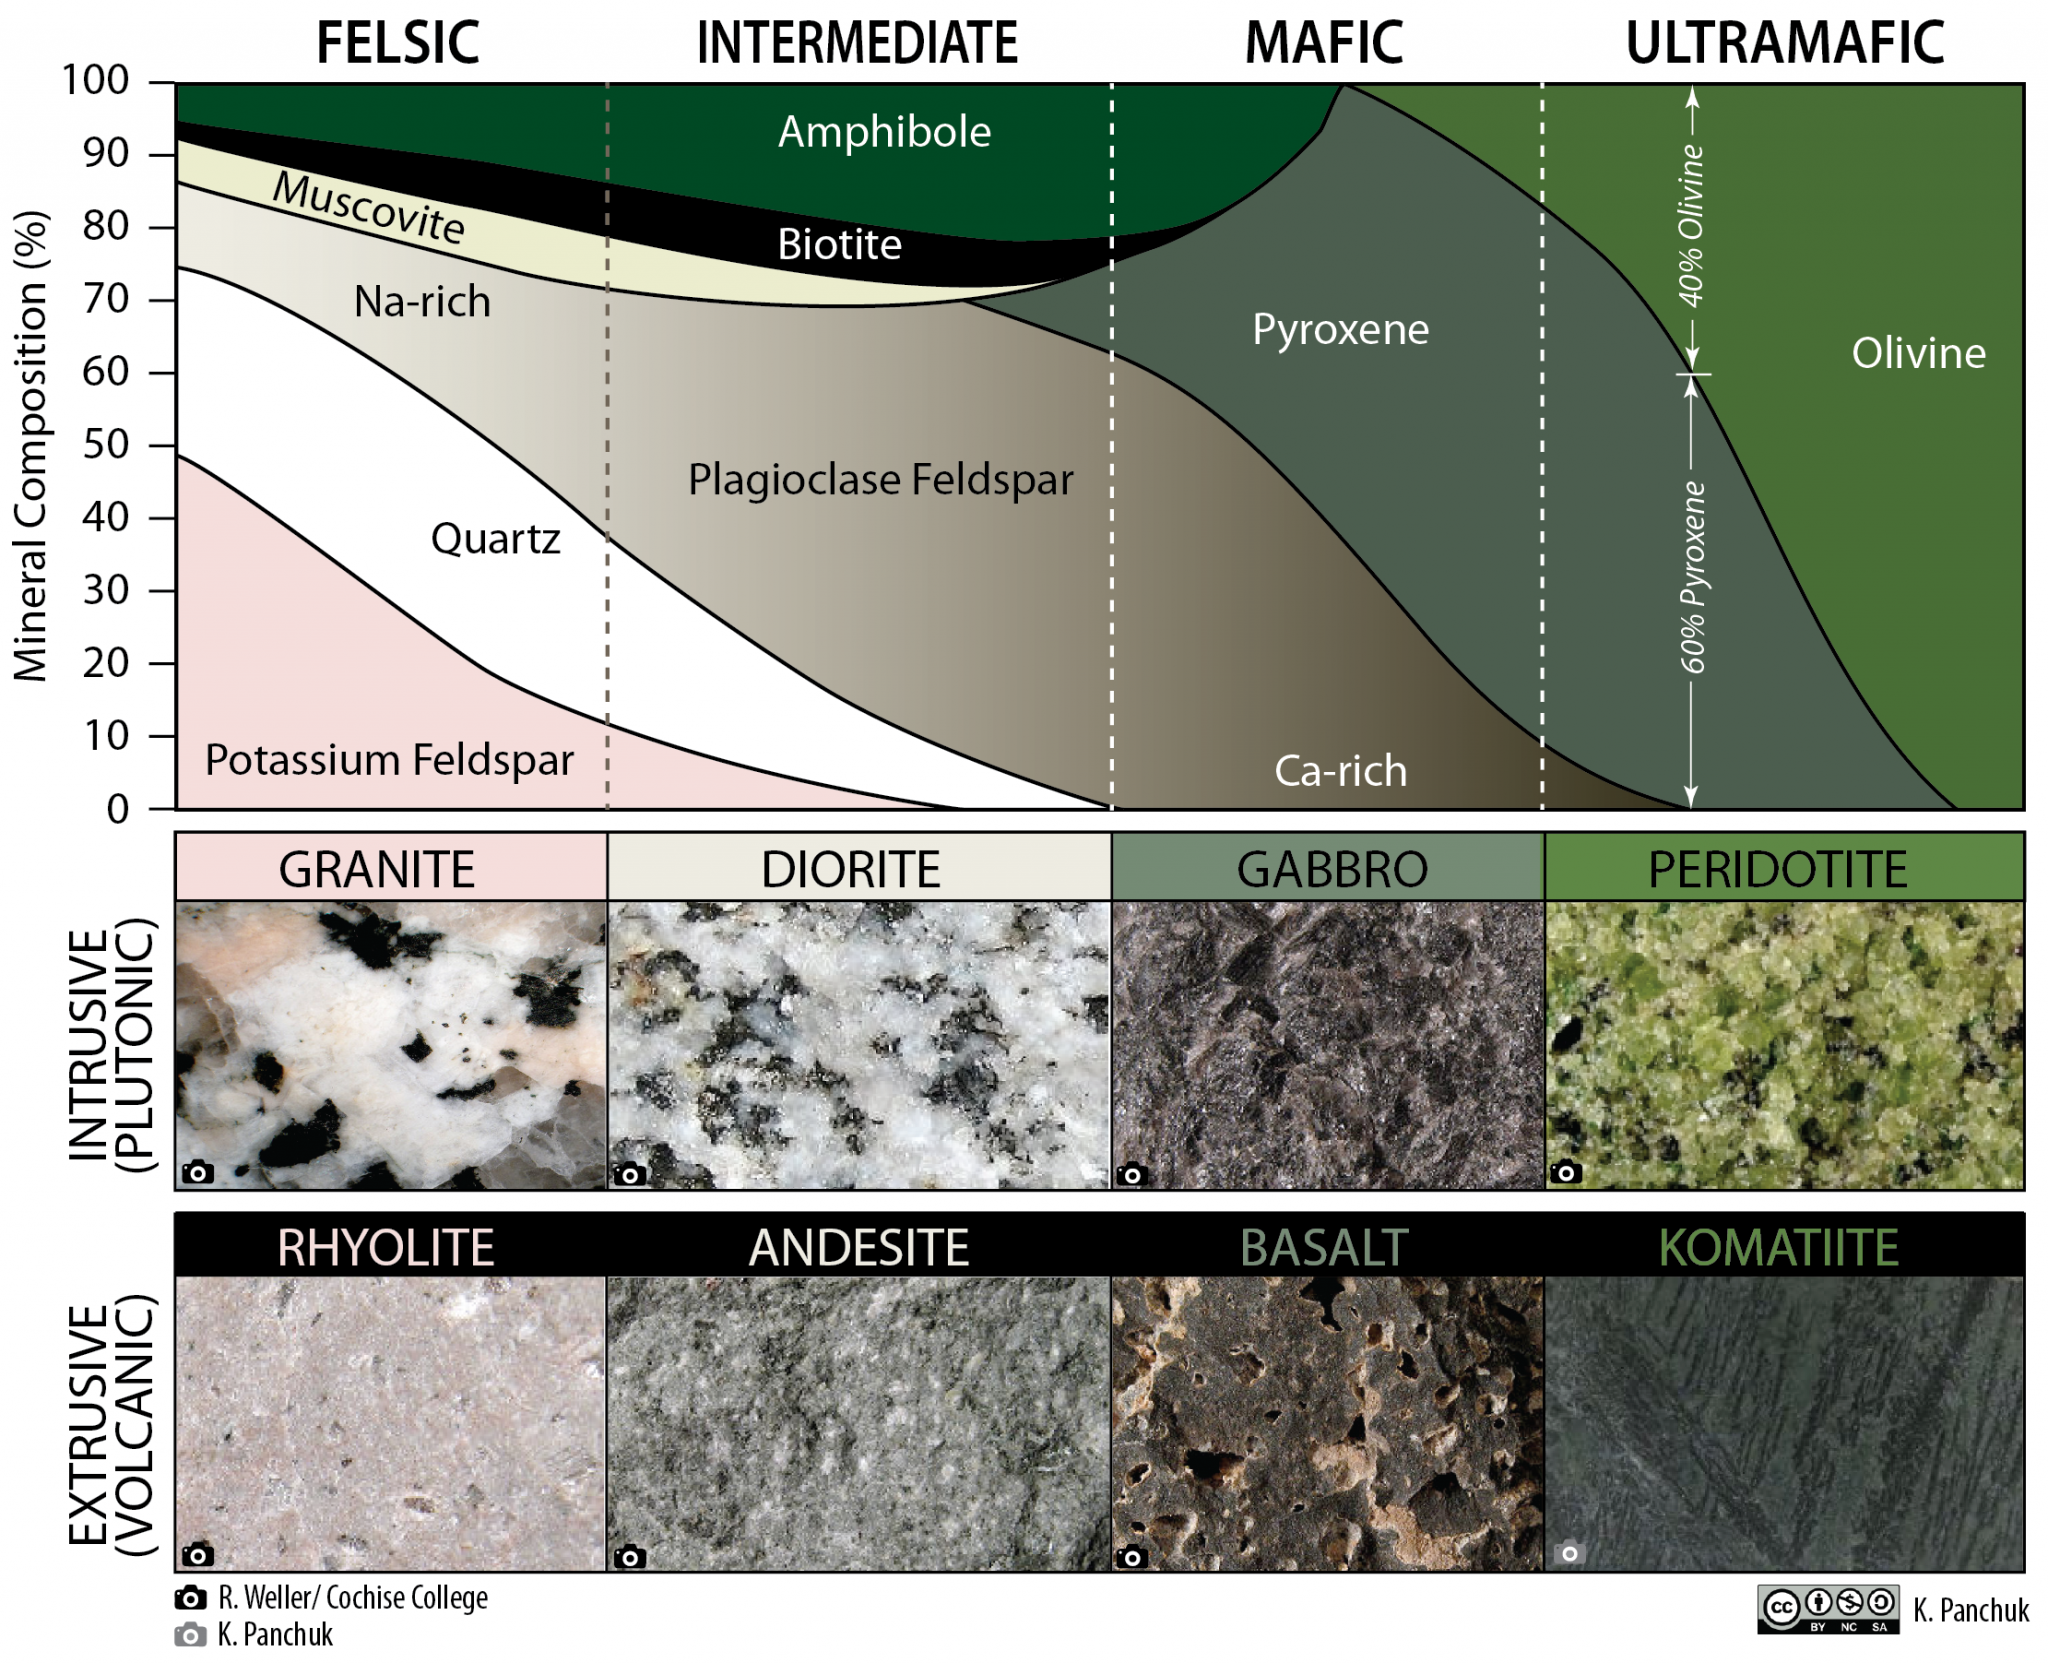 Classification diagram for igneous rocks. Igneous rocks are classified according to the relative abundances of minerals they contain. A given rock is represented by a vertical line in the diagram. In the mafic field, the arrows represent a rock containing 48% pyroxene and 52% plagioclase feldspar. The name an igneous rock gets depends not only on composition, but on whether it is intrusive or extrusive. _Source: Karla Panchuk (2018) CC BY-NC-SA 4.0, modified after Steven Earle (2015) CC BY 4.0 [view source](https://opentextbc.ca/physicalgeologyearle/wp-content/uploads/sites/145/2016/06/ingeous-rocks2.png) and others, with photos by R. Weller/Cochise College. Click the image for links to photos and notes on image construction. [High-resolution version](https://openpress.usask.ca/app/uploads/sites/29/2018/06/igneous-rock-classification_revised.png)._